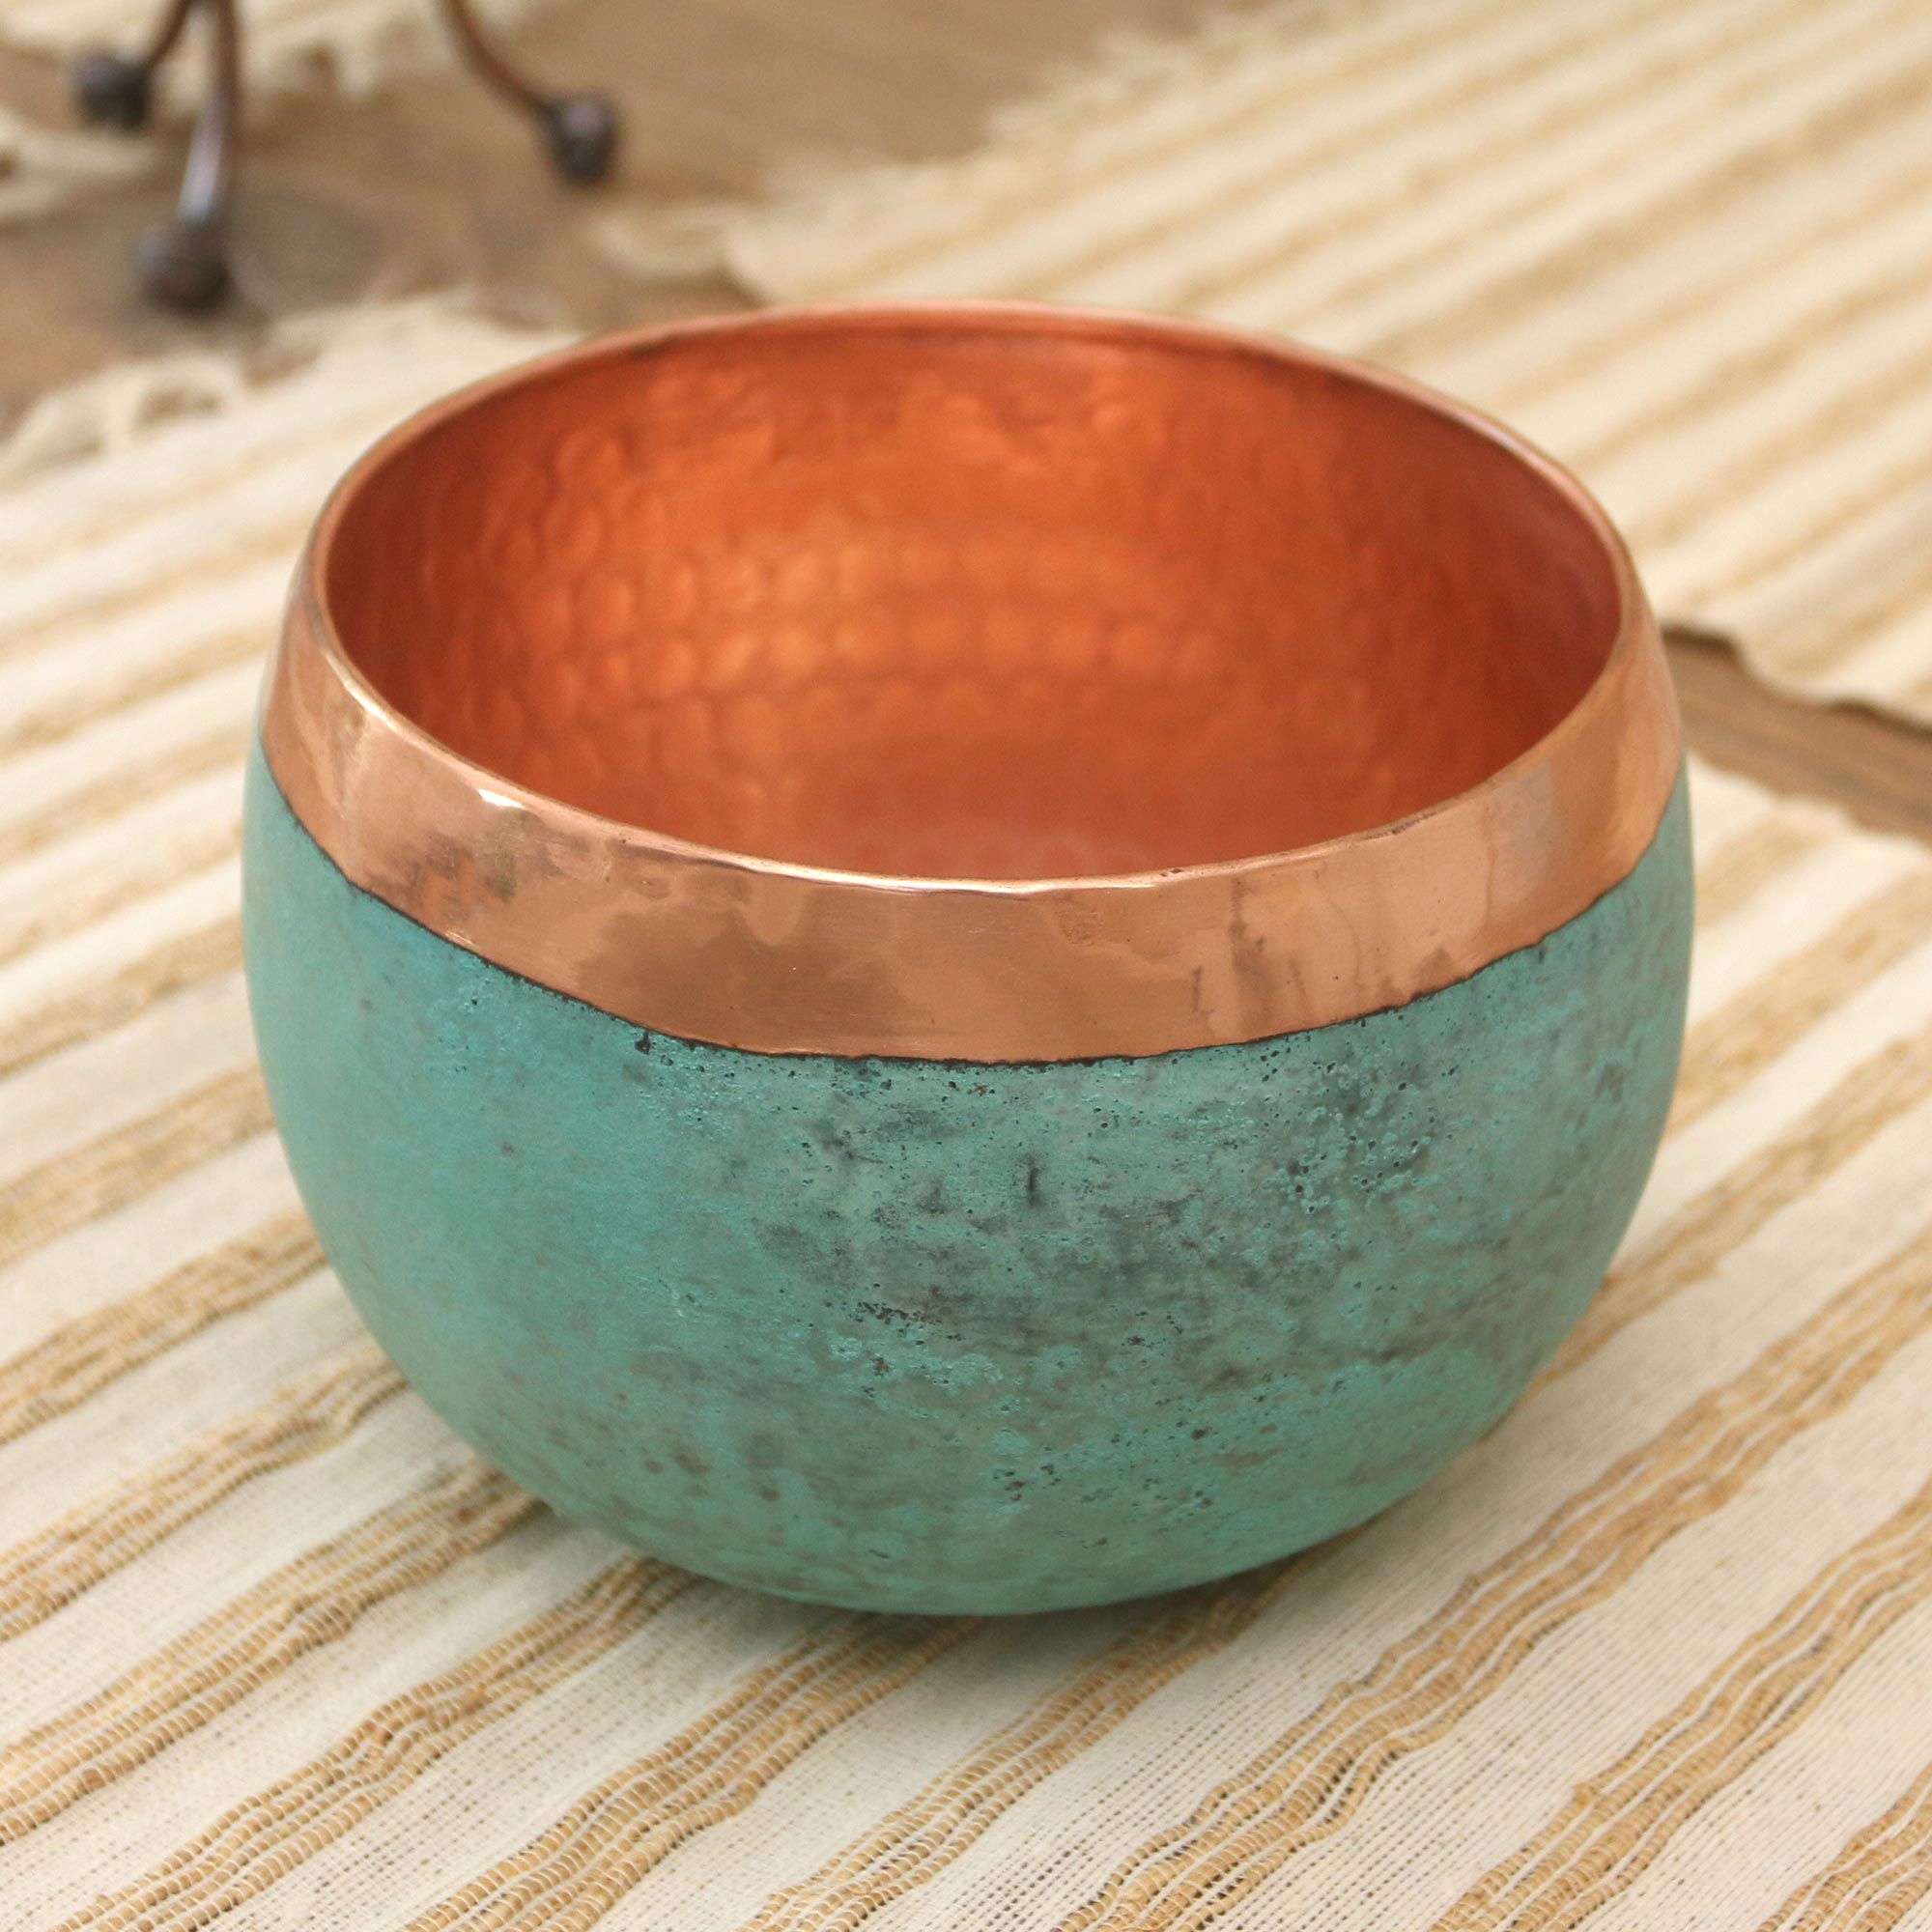 Copper Mixing Bowl 12 Inches Hammered No Brand